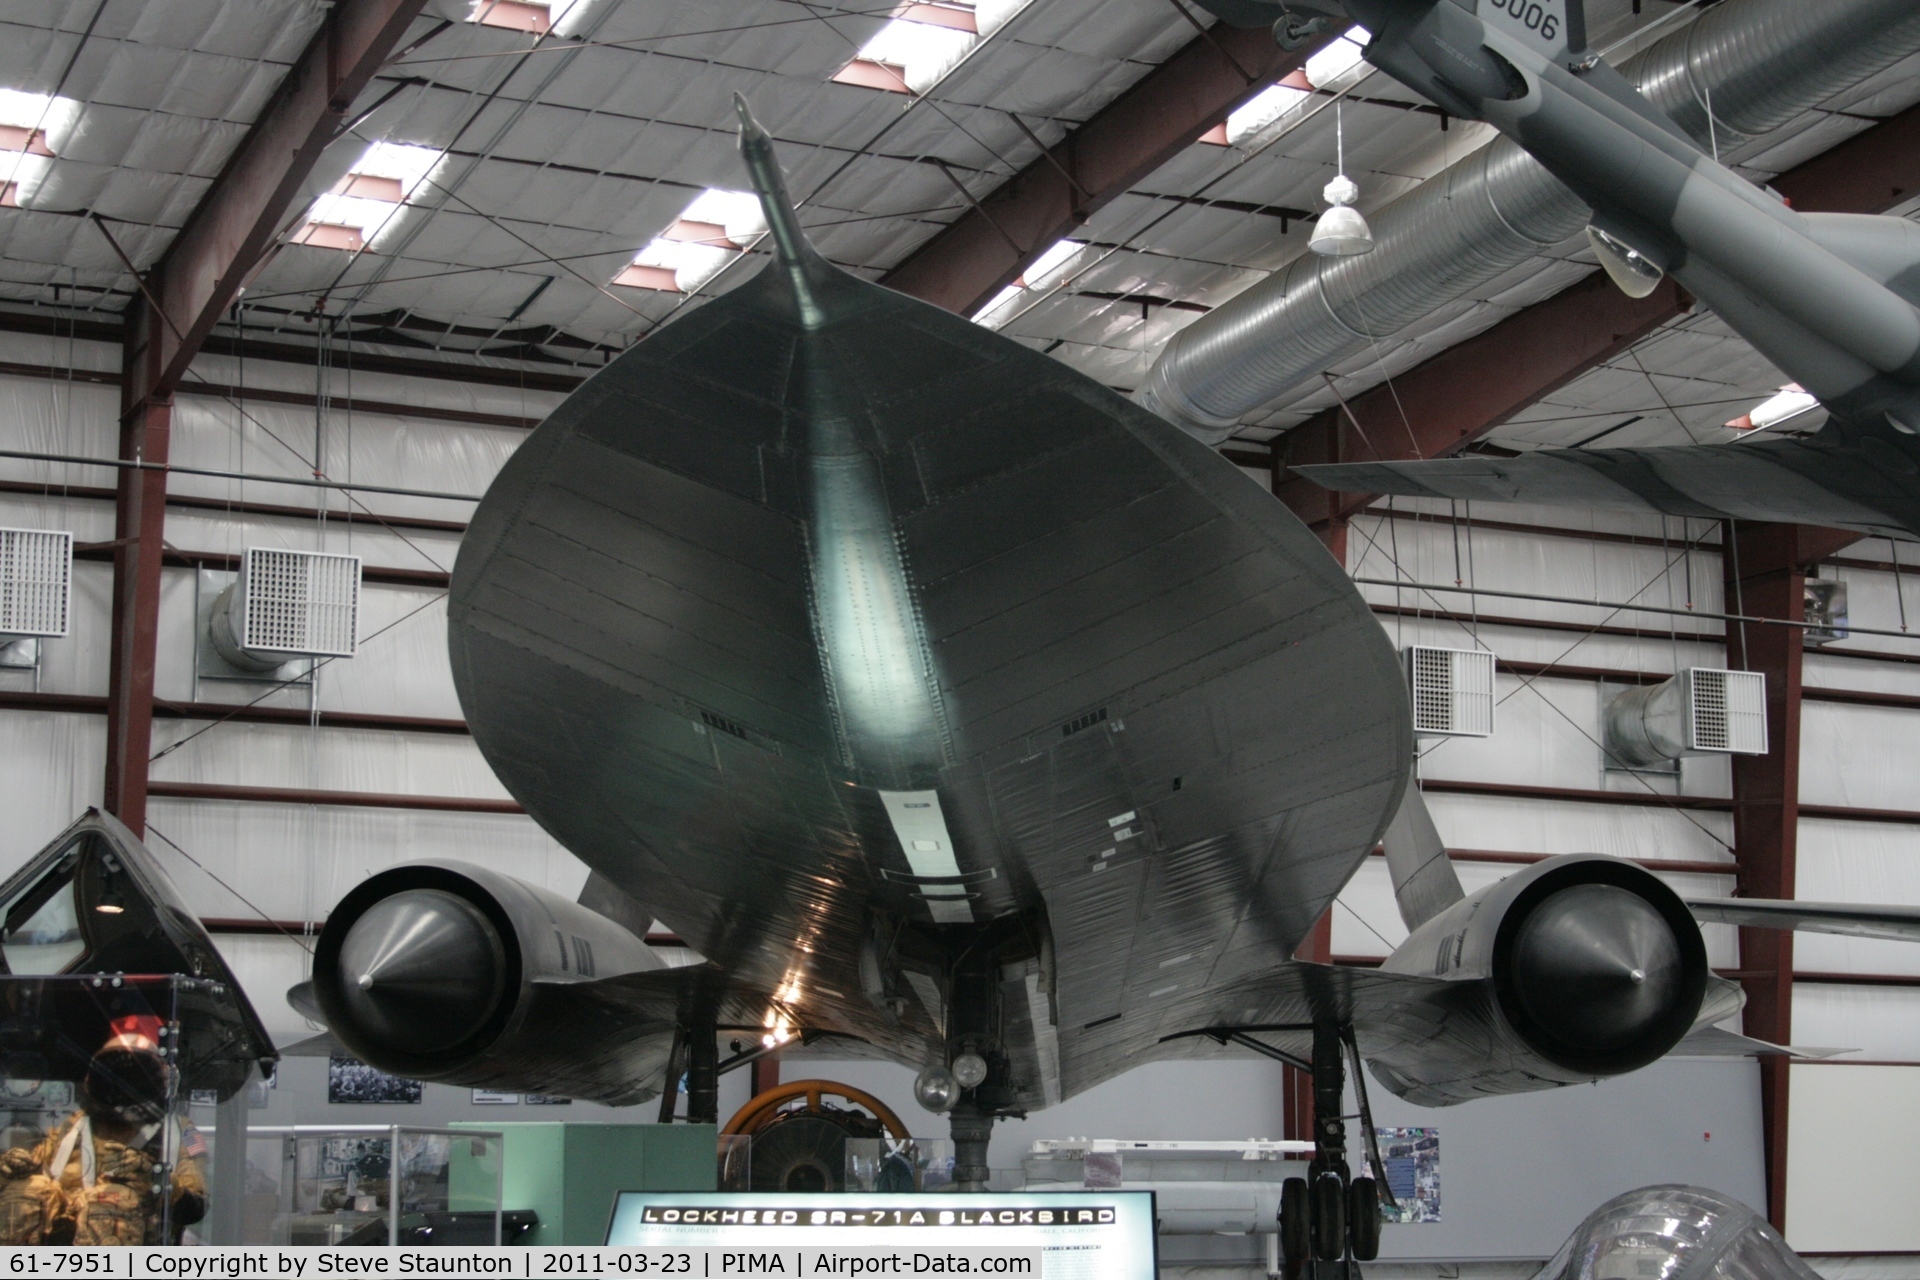 61-7951, 1961 Lockheed SR-71A Blackbird C/N 2002, Taken at Pima Air and Space Museum, in March 2011 whilst on an Aeroprint Aviation tour